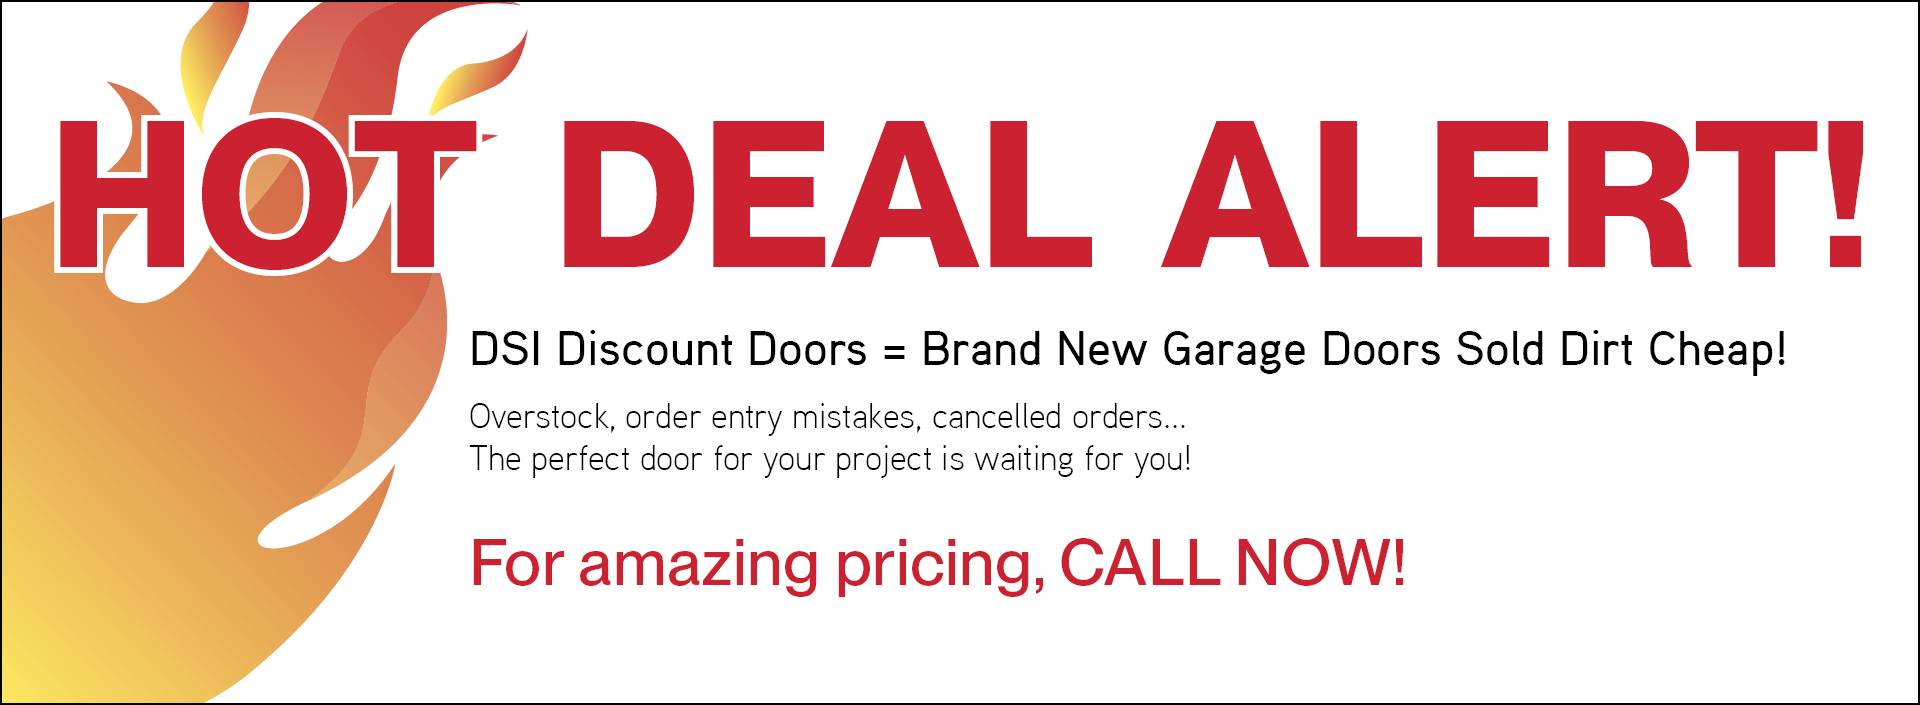 HOT DEAL ALERT! Brand New Garage Doors Sold Dirt Cheap! For amazing pricing, CALL NOW!